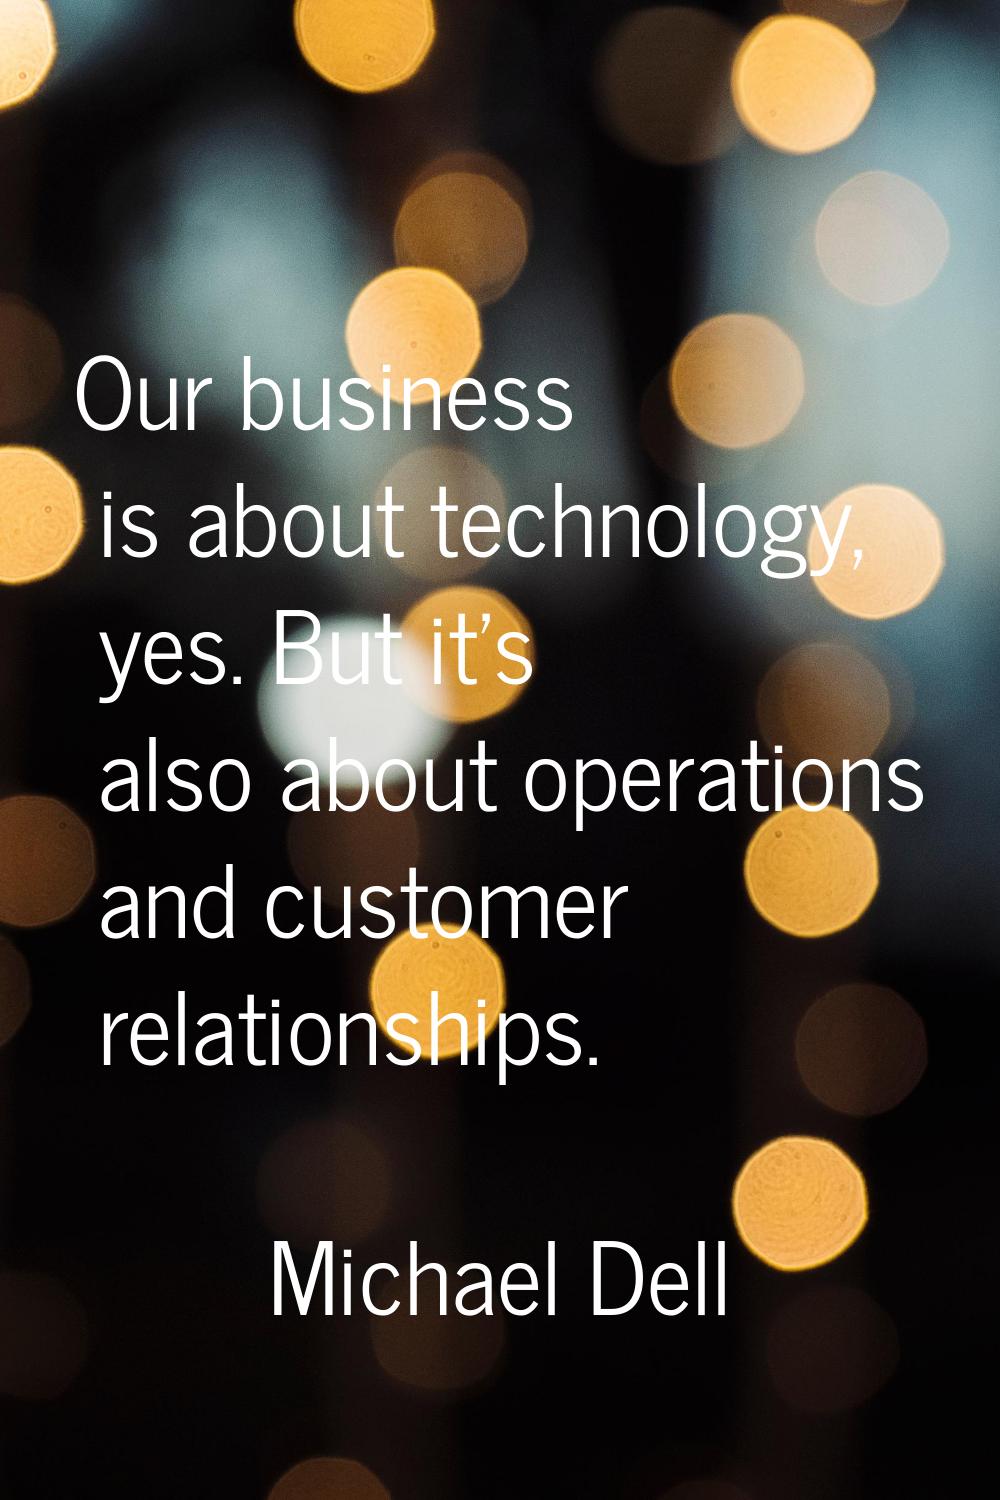 Our business is about technology, yes. But it's also about operations and customer relationships.